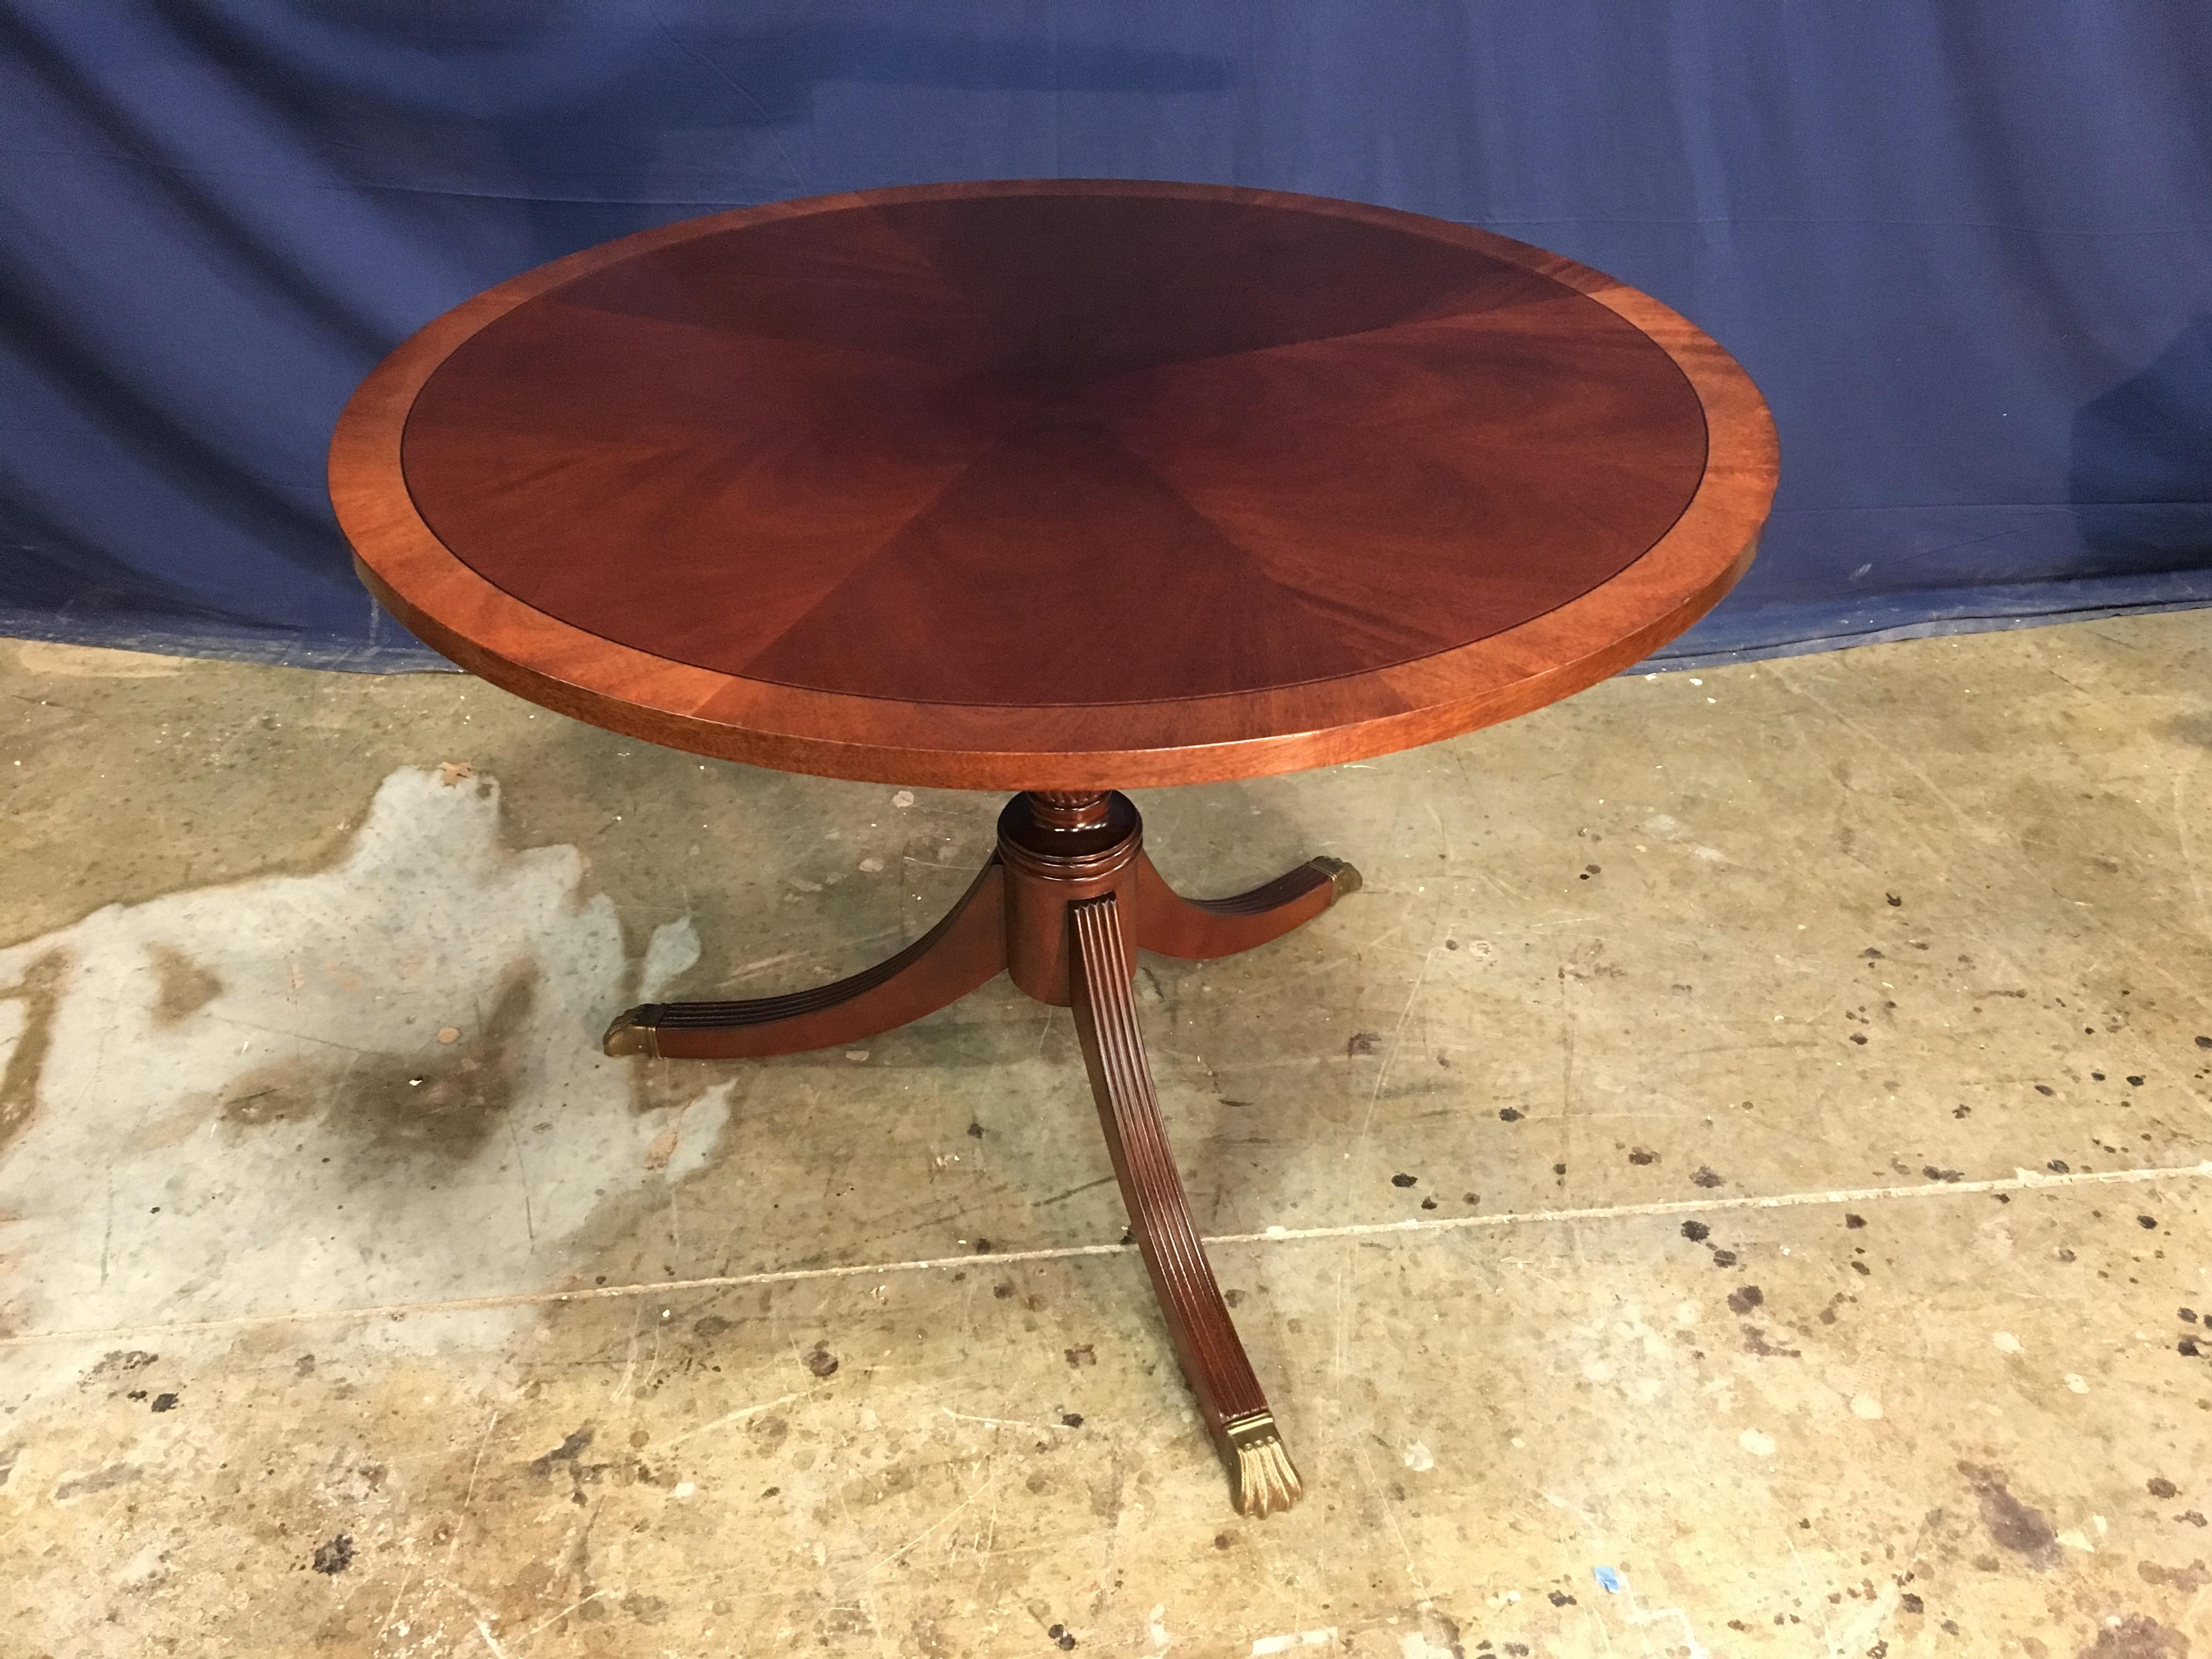 This is made-to-order round traditional mahogany accent or foyer table made in the Leighton Hall shop. It features a field of radial cut cathedral mahogany with a contrasting mahogany border. It has a hand rubbed and polished semigloss finish. The